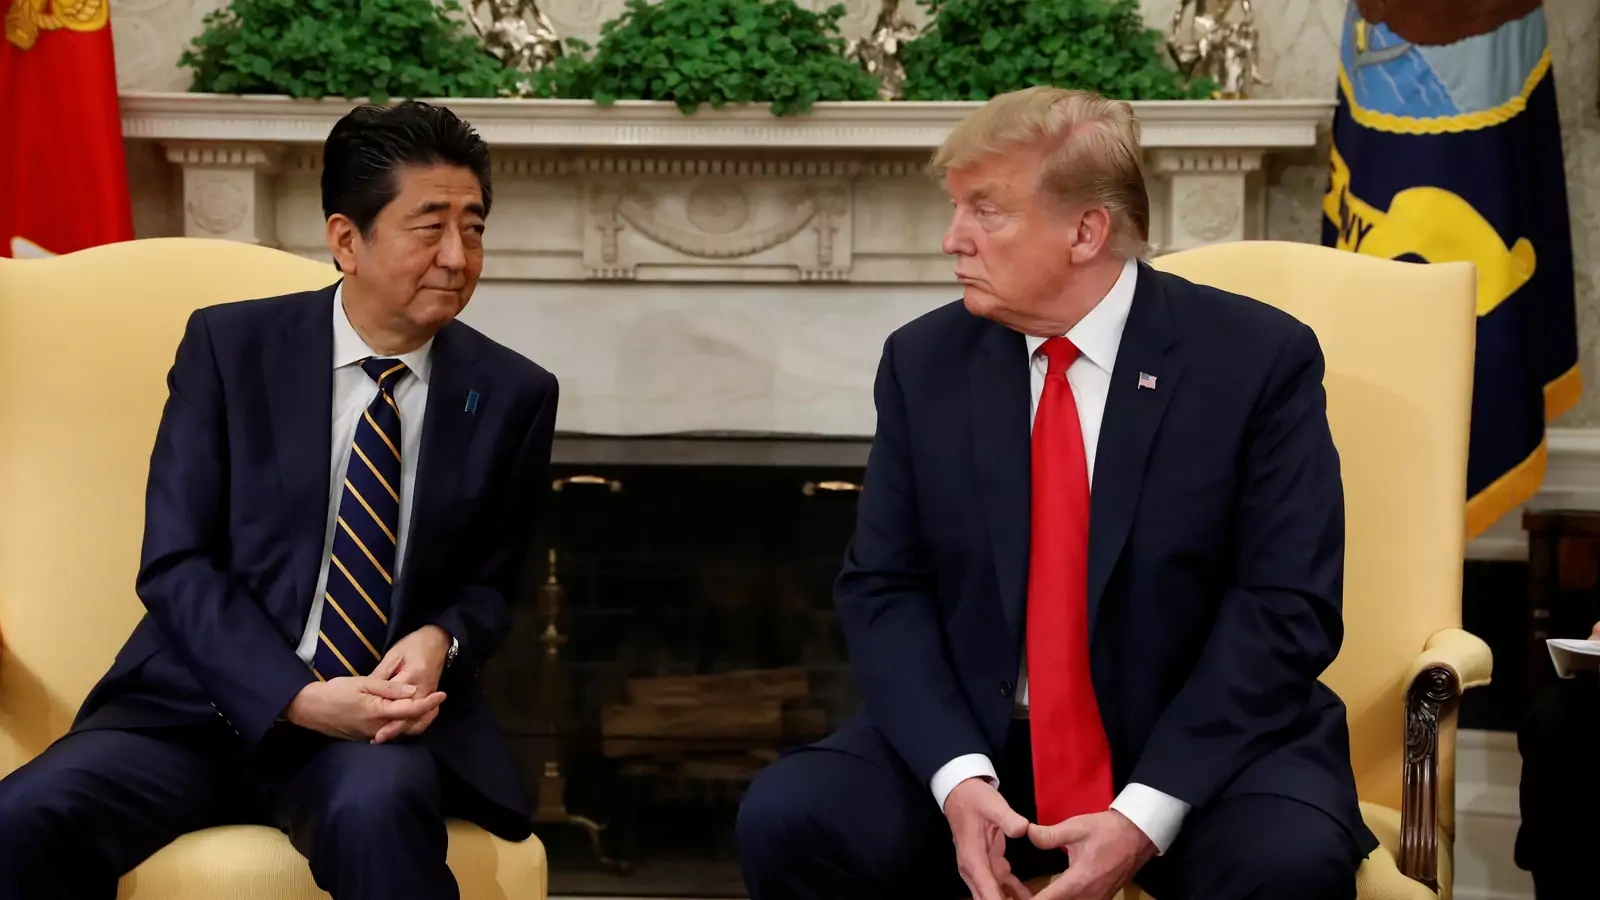 U.S. President Donald Trump meets with Japan's Prime Minister Shinzo Abe in the Oval Office at the White House in Washington, U.S., April 26, 2019. 